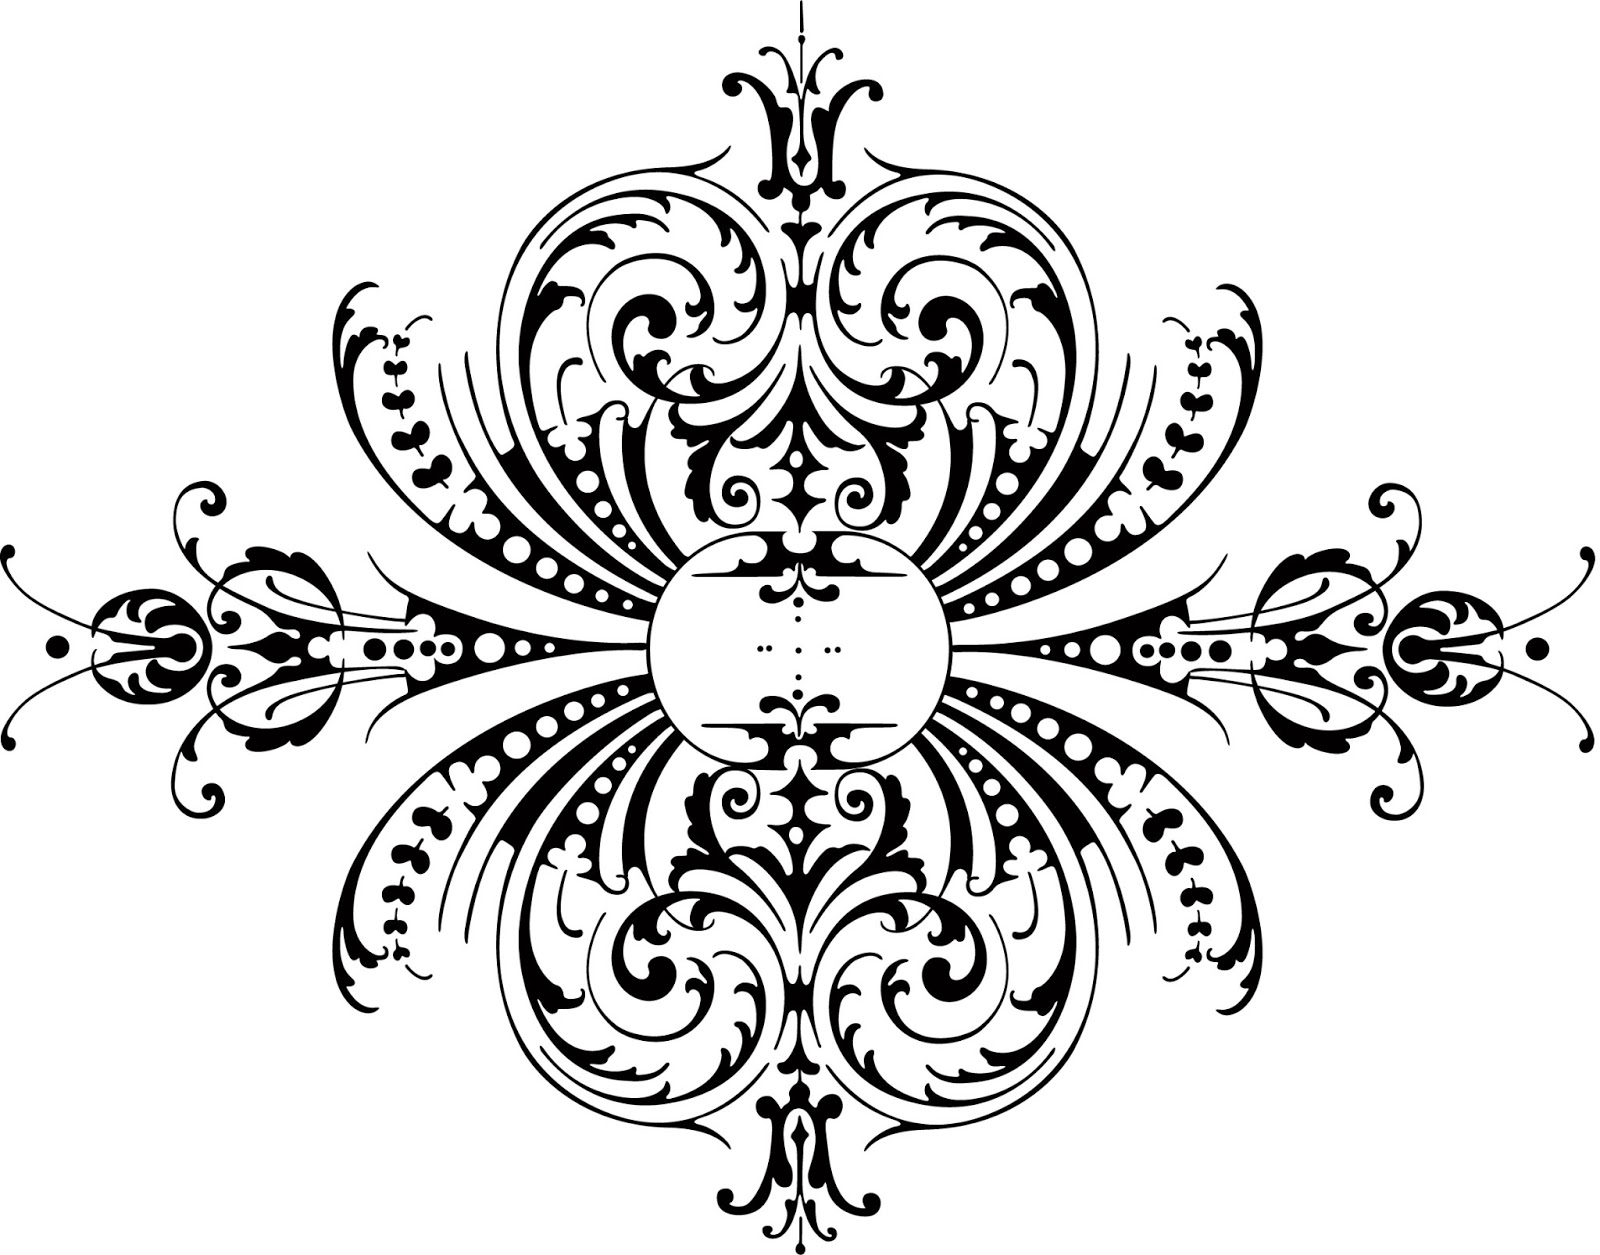 Free vintage clip art images: Free calligraphic ornaments